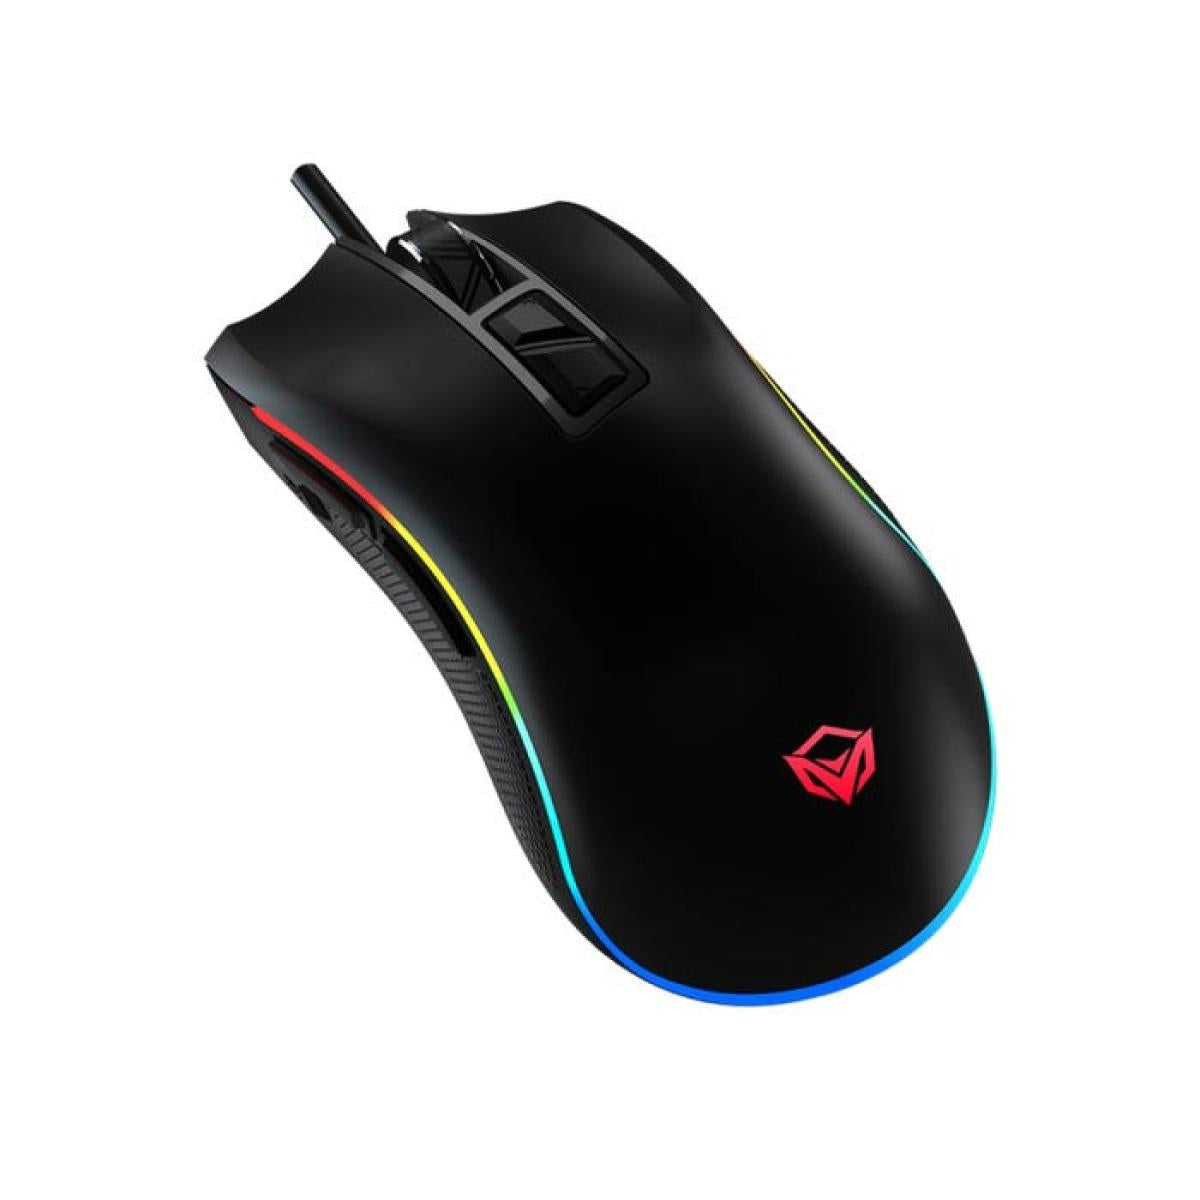 MeeTion Tracking Gaming Mouse Hera